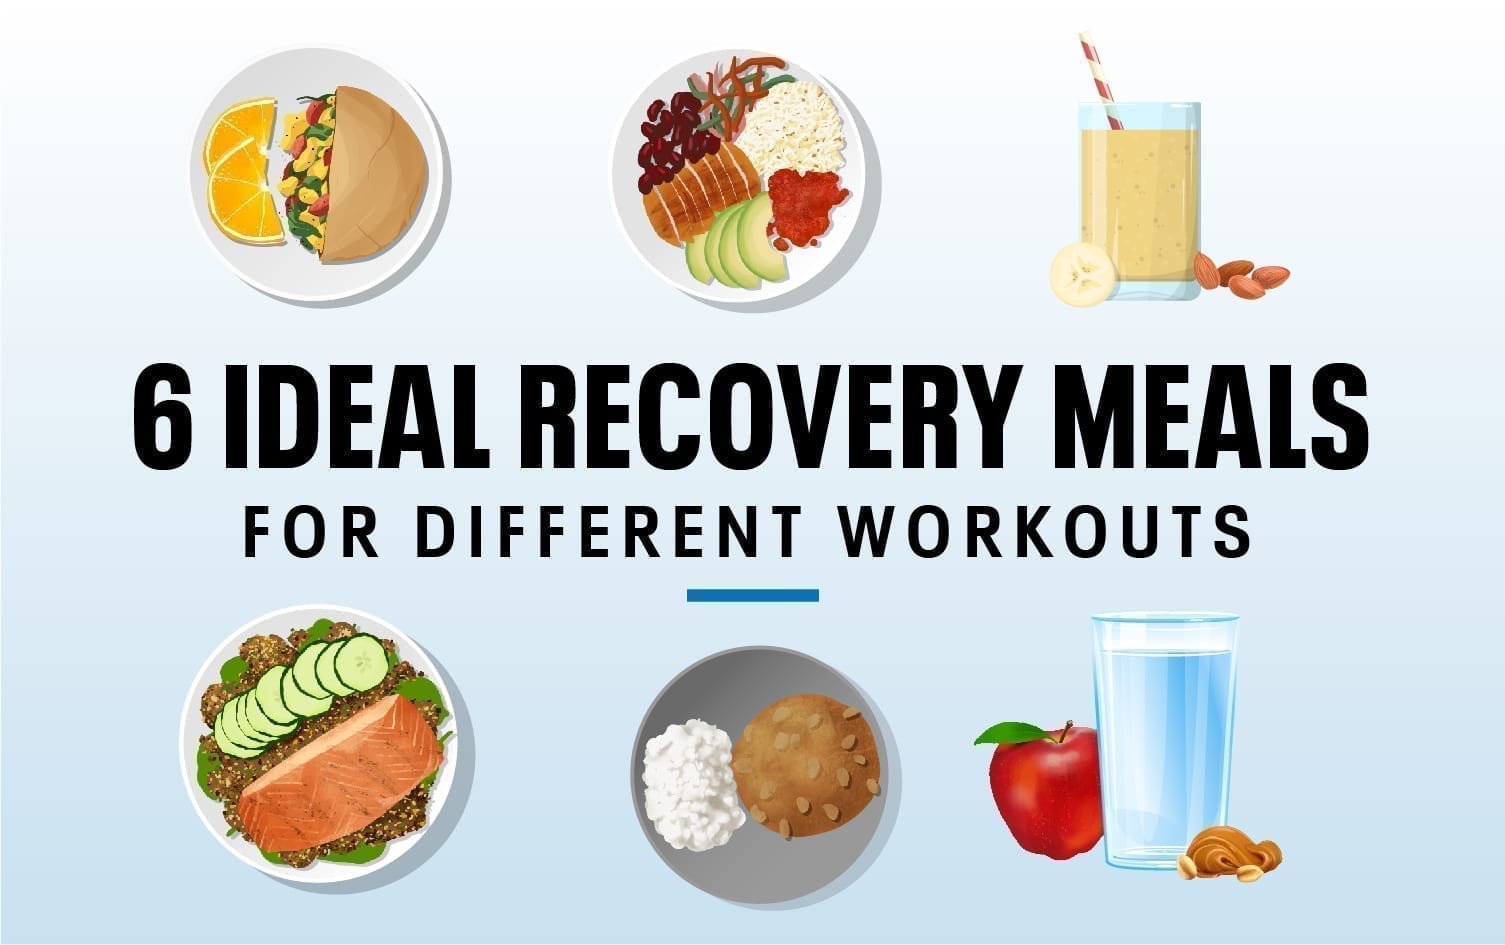 Recovery foods for post-workout